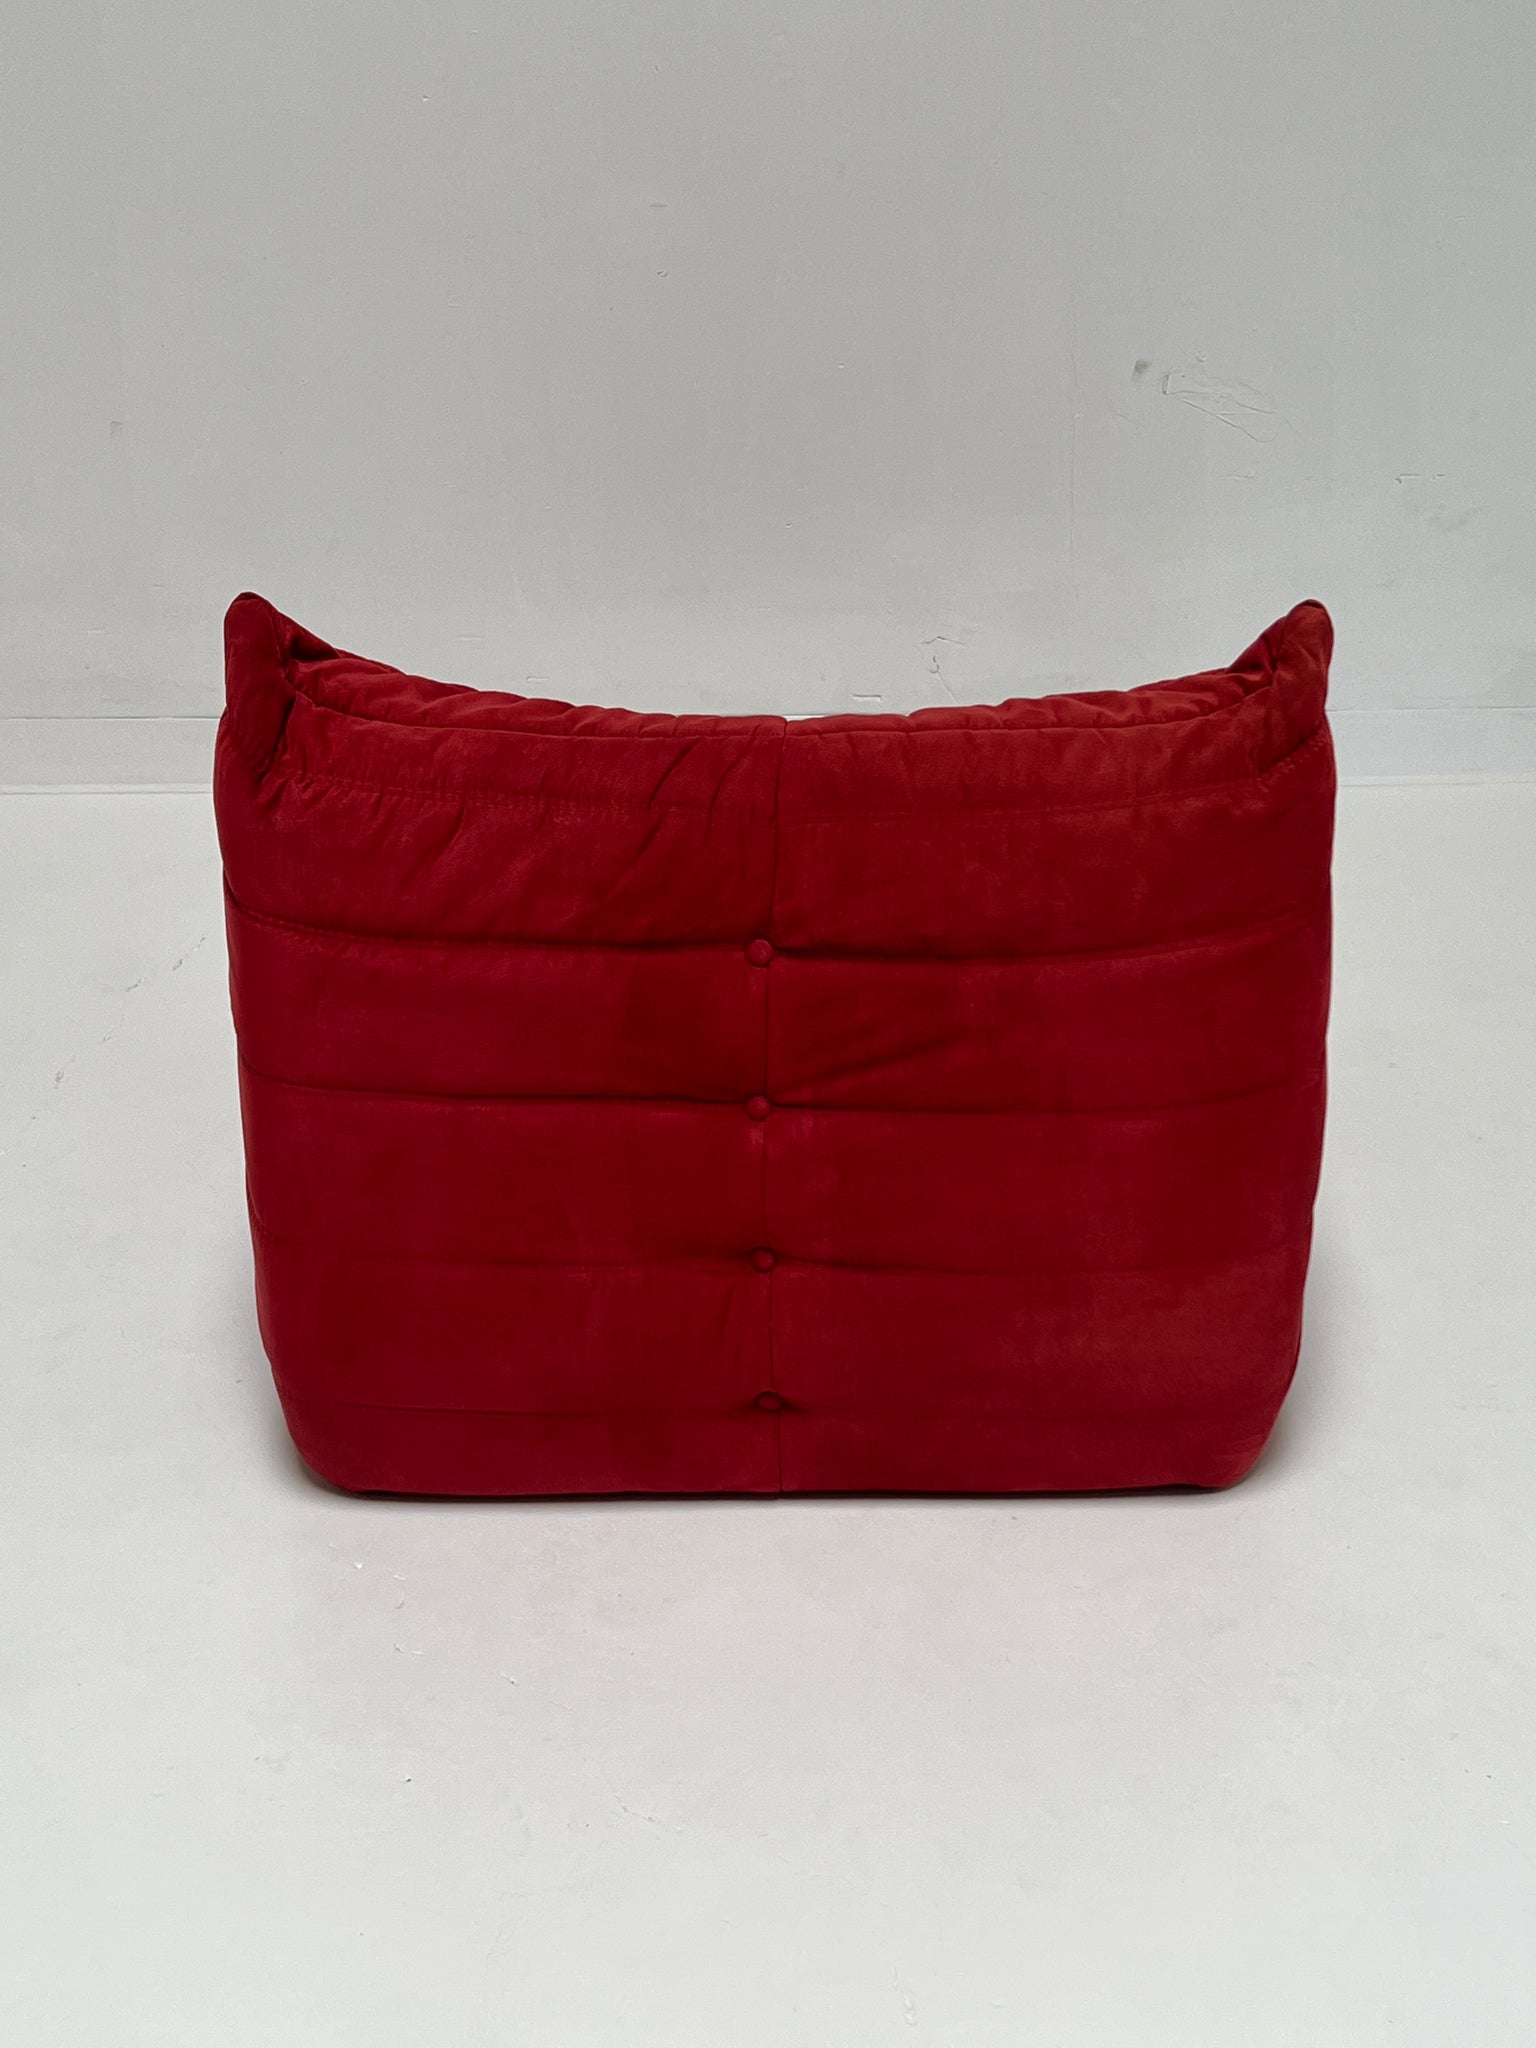 Red Togo Style Fireside Chair